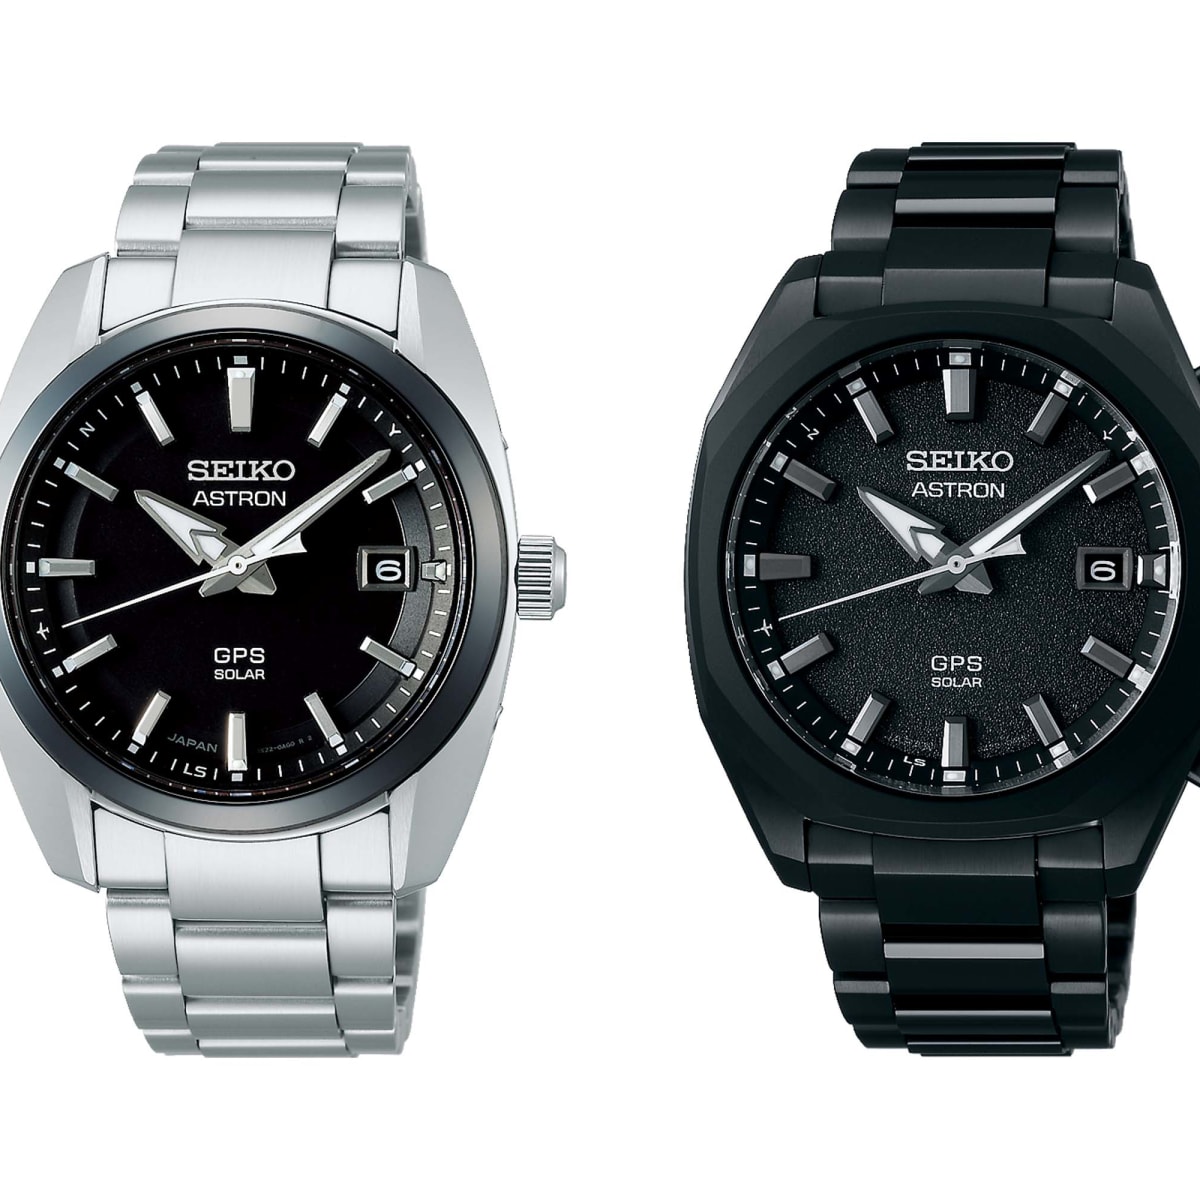 Seiko releases a new 39mm version of its Astron travel watch - Acquire